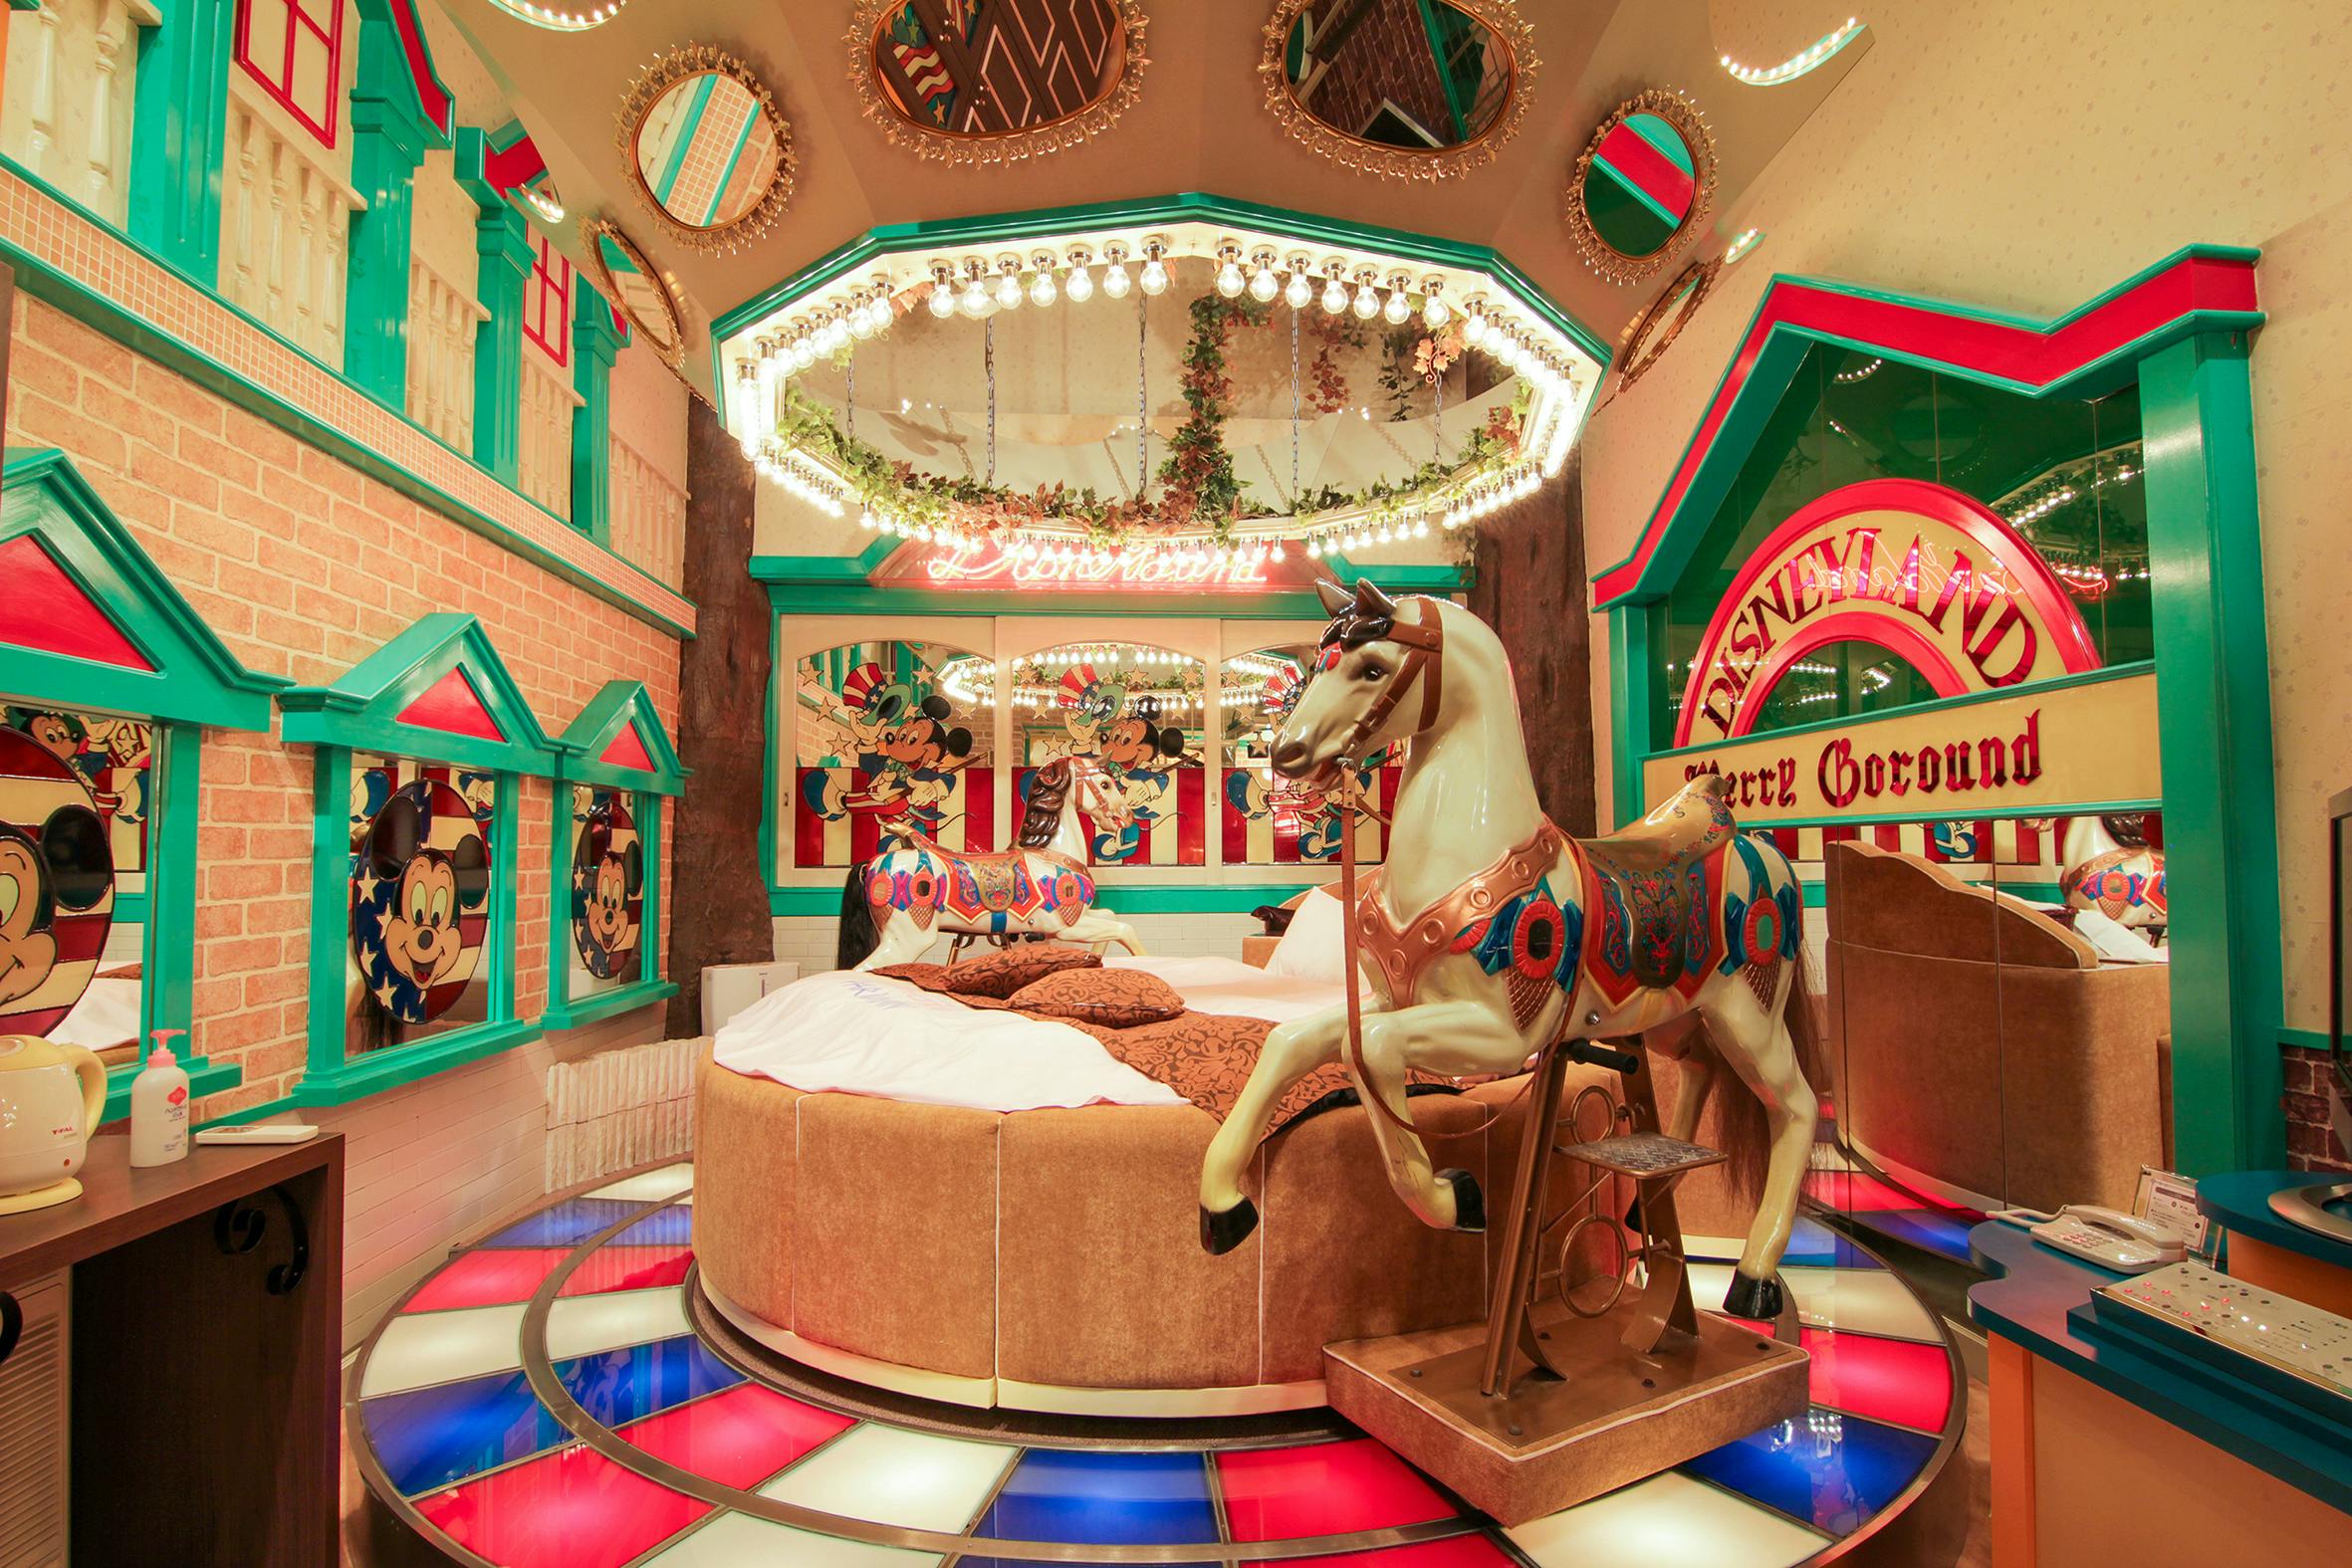 Rotating Round Bed is center stage in the carousel in Theme Park inspired room at Hotel France Love Hotel